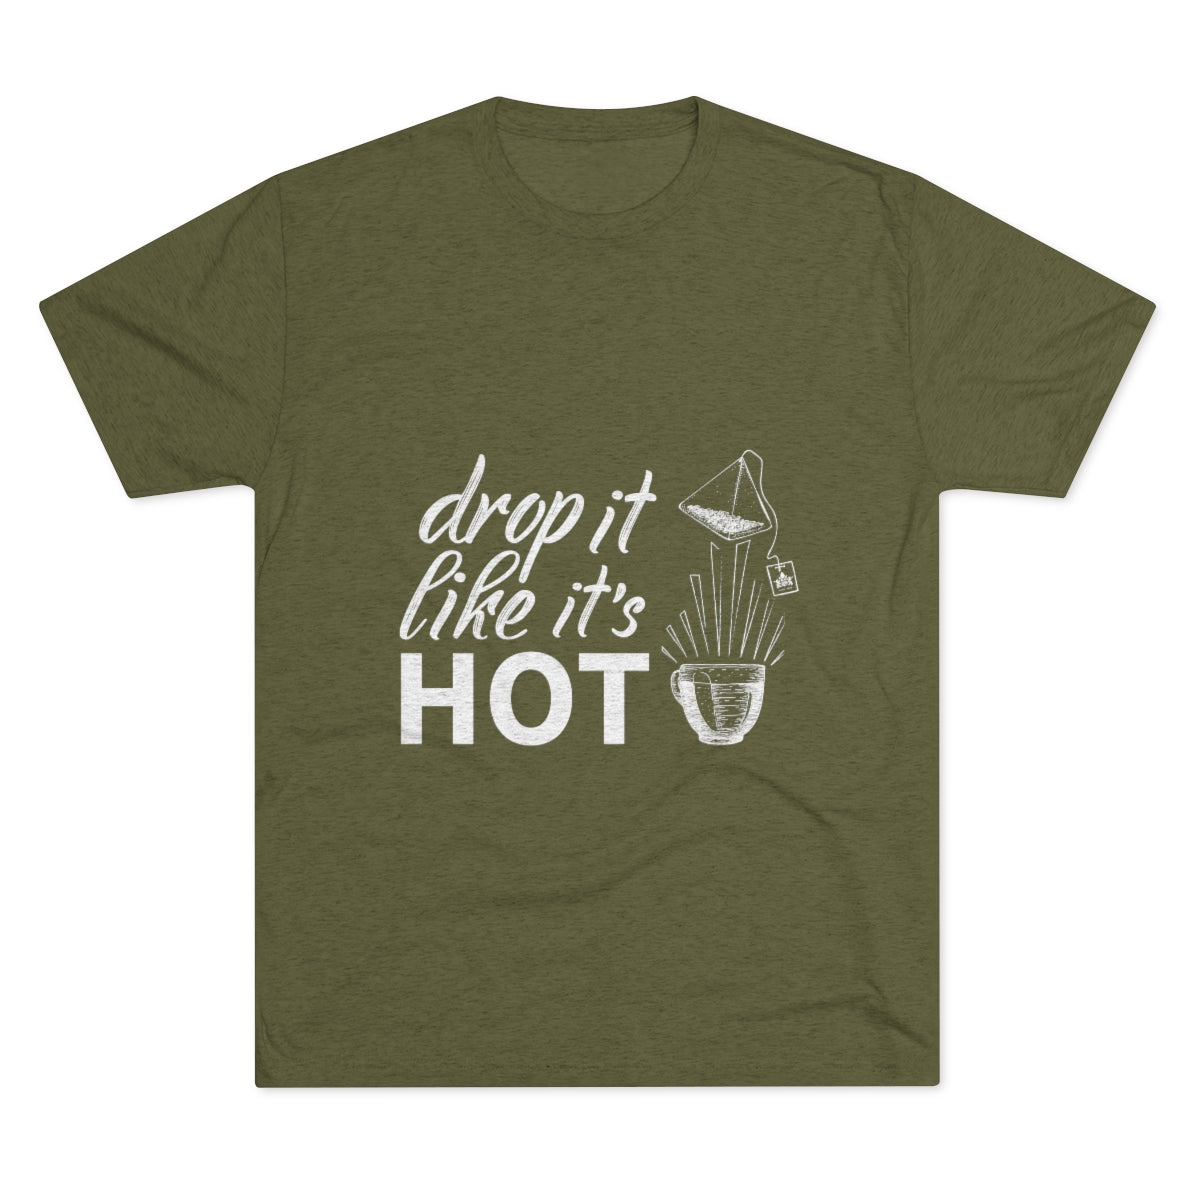 Drop It Like It's Hot Graphic Tee - Tri-Blend Military Green L - Harney & Sons Fine Teas